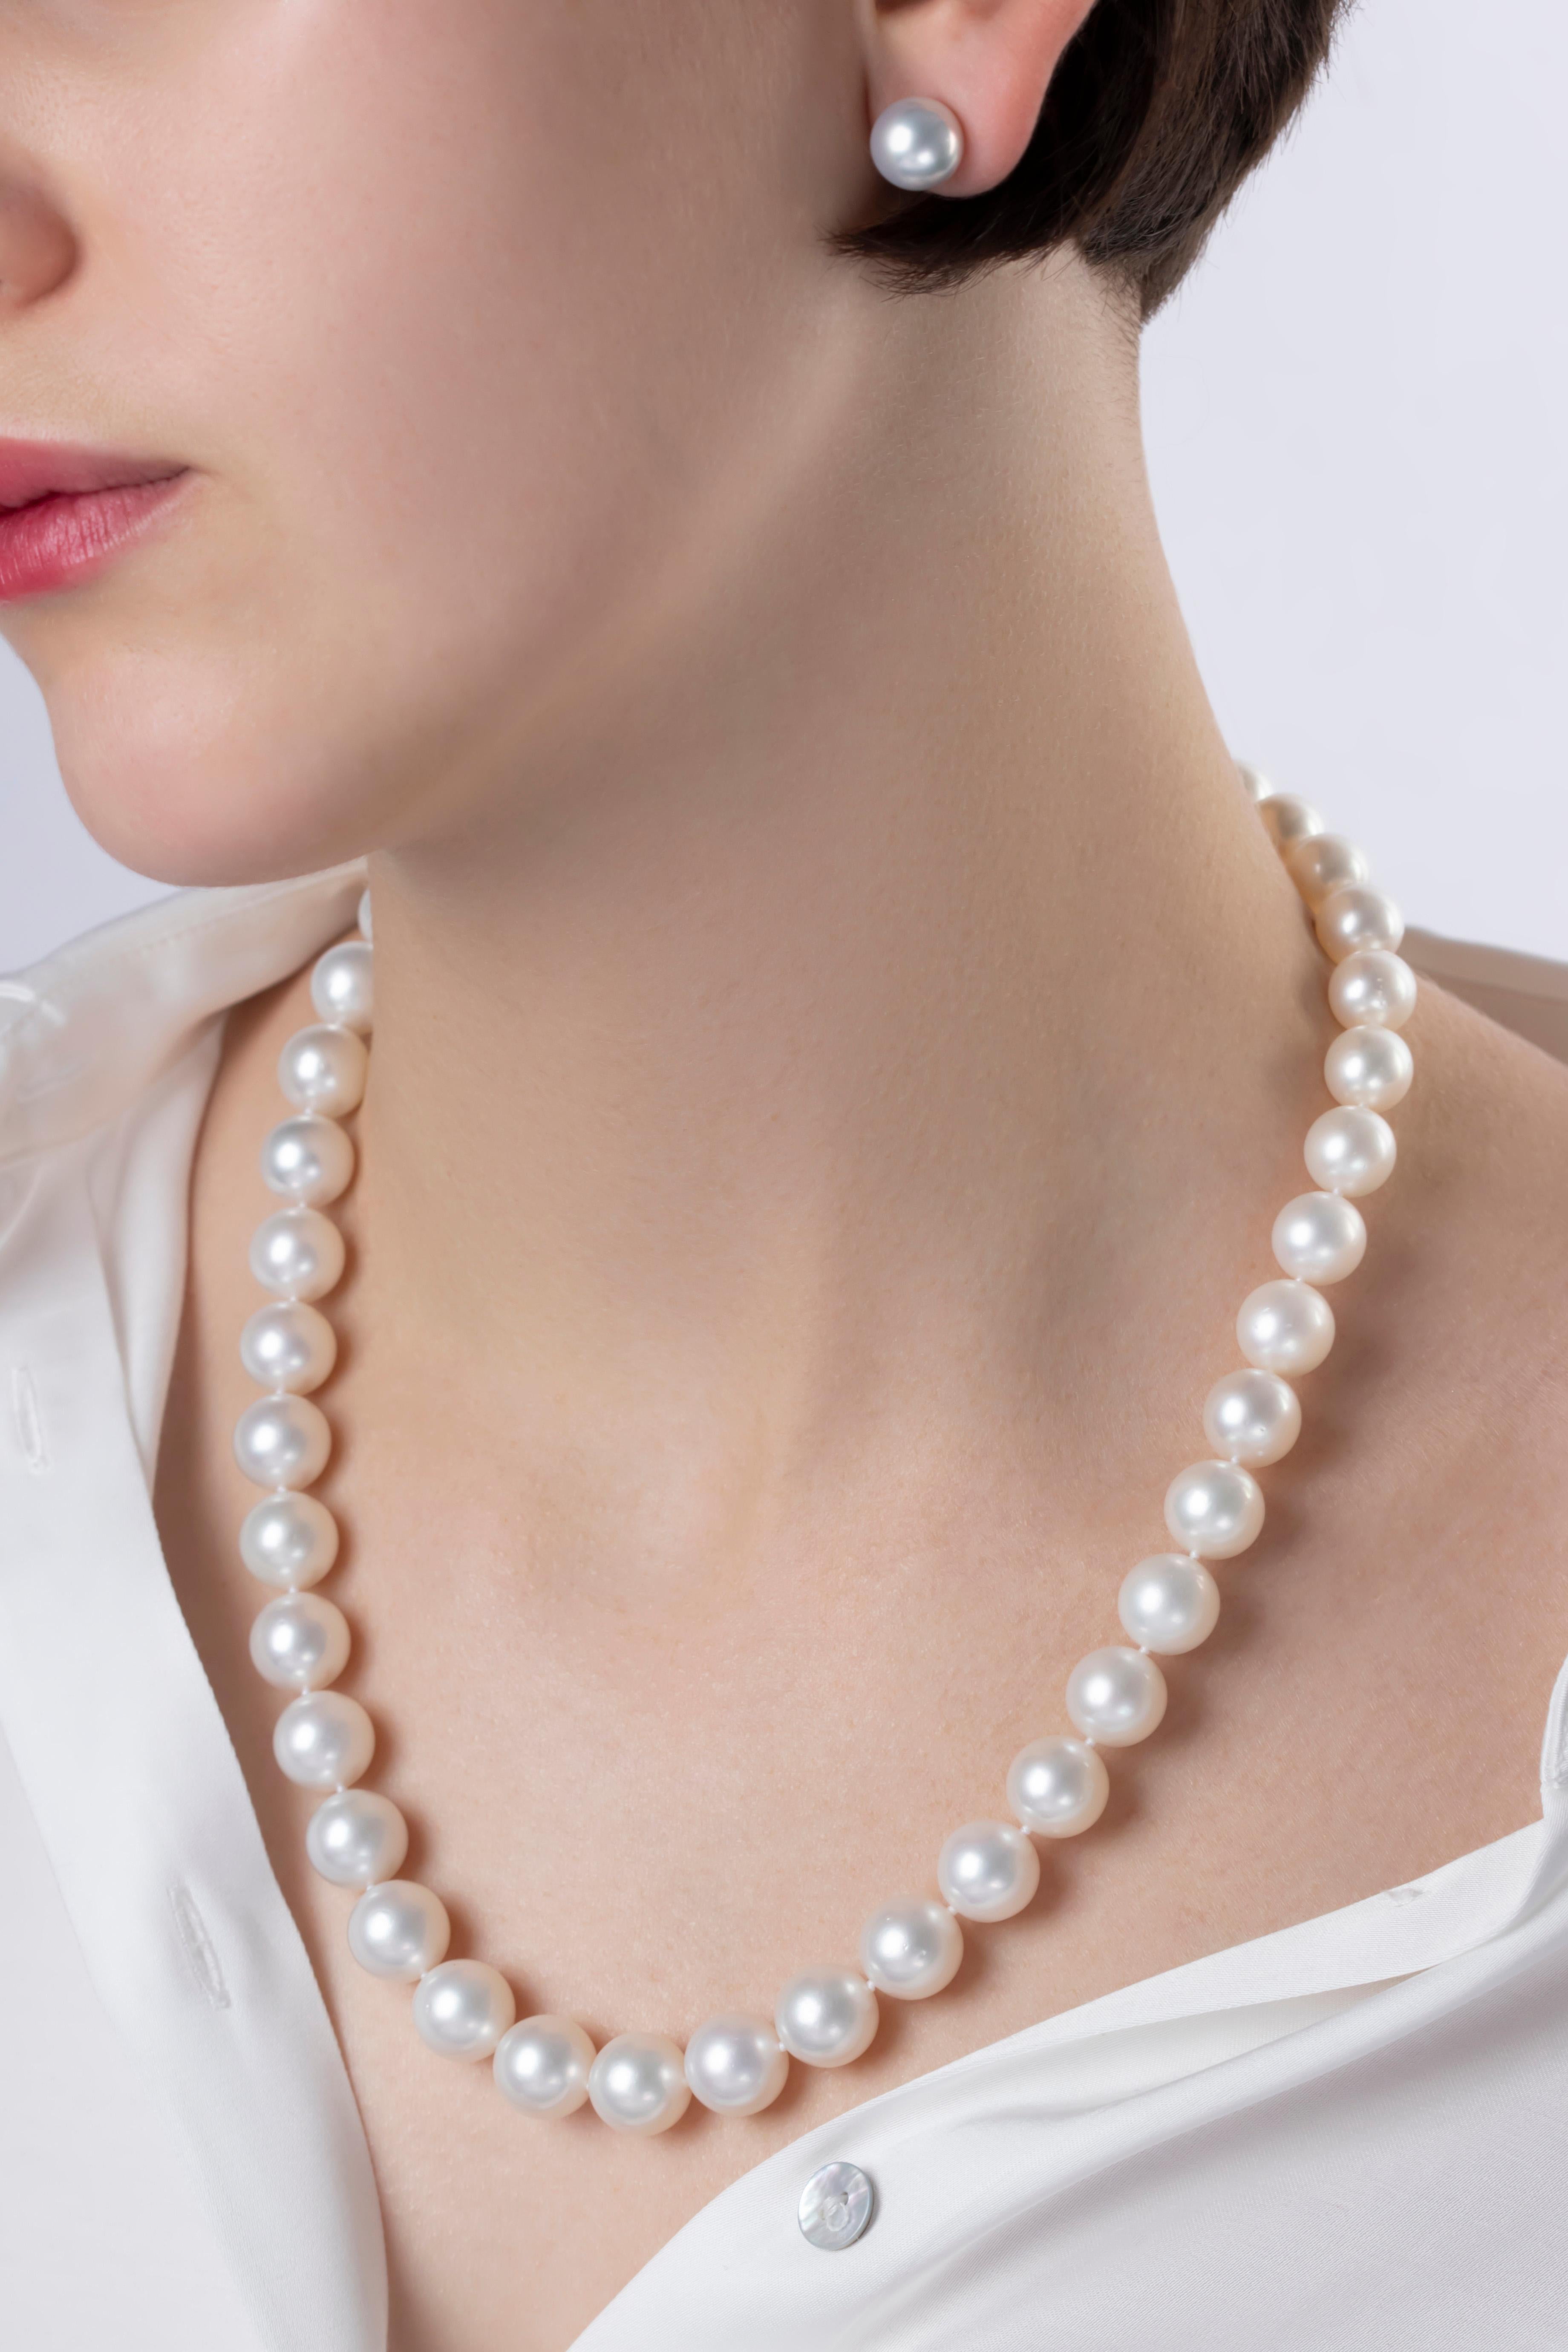 This timeless necklace by Yoko London features 10-12mm Australian South Sea pearls, finished with an elegant 18K white gold ball clasp. Hand-strung in our London atelier by the world’s leading pearl specialists, this classic necklace an essential